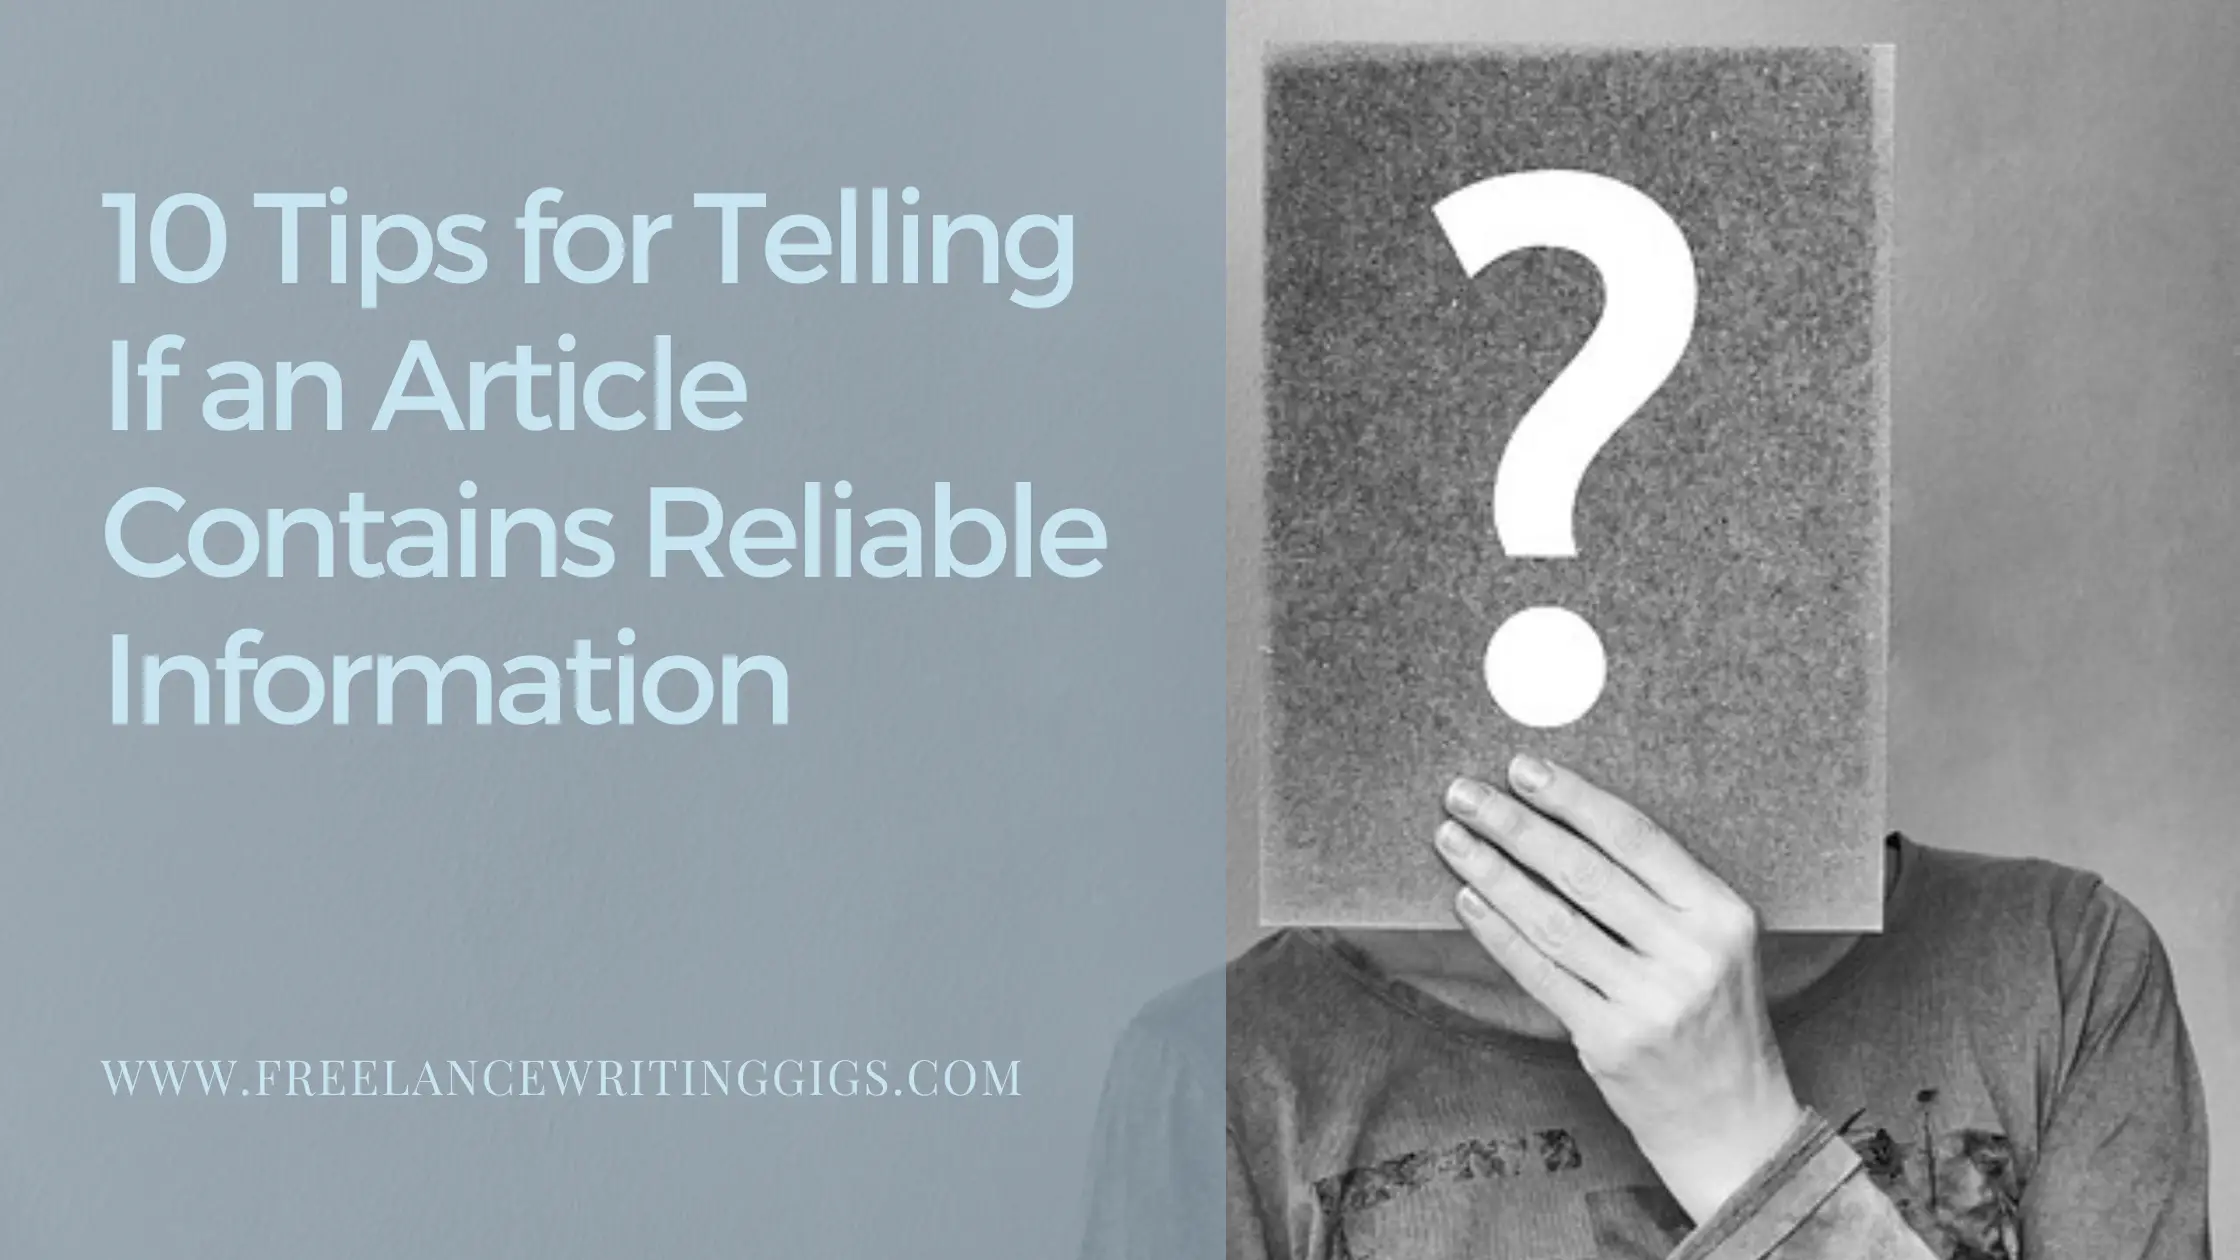 10 Tips for Telling if an Article Contains Reliable Information